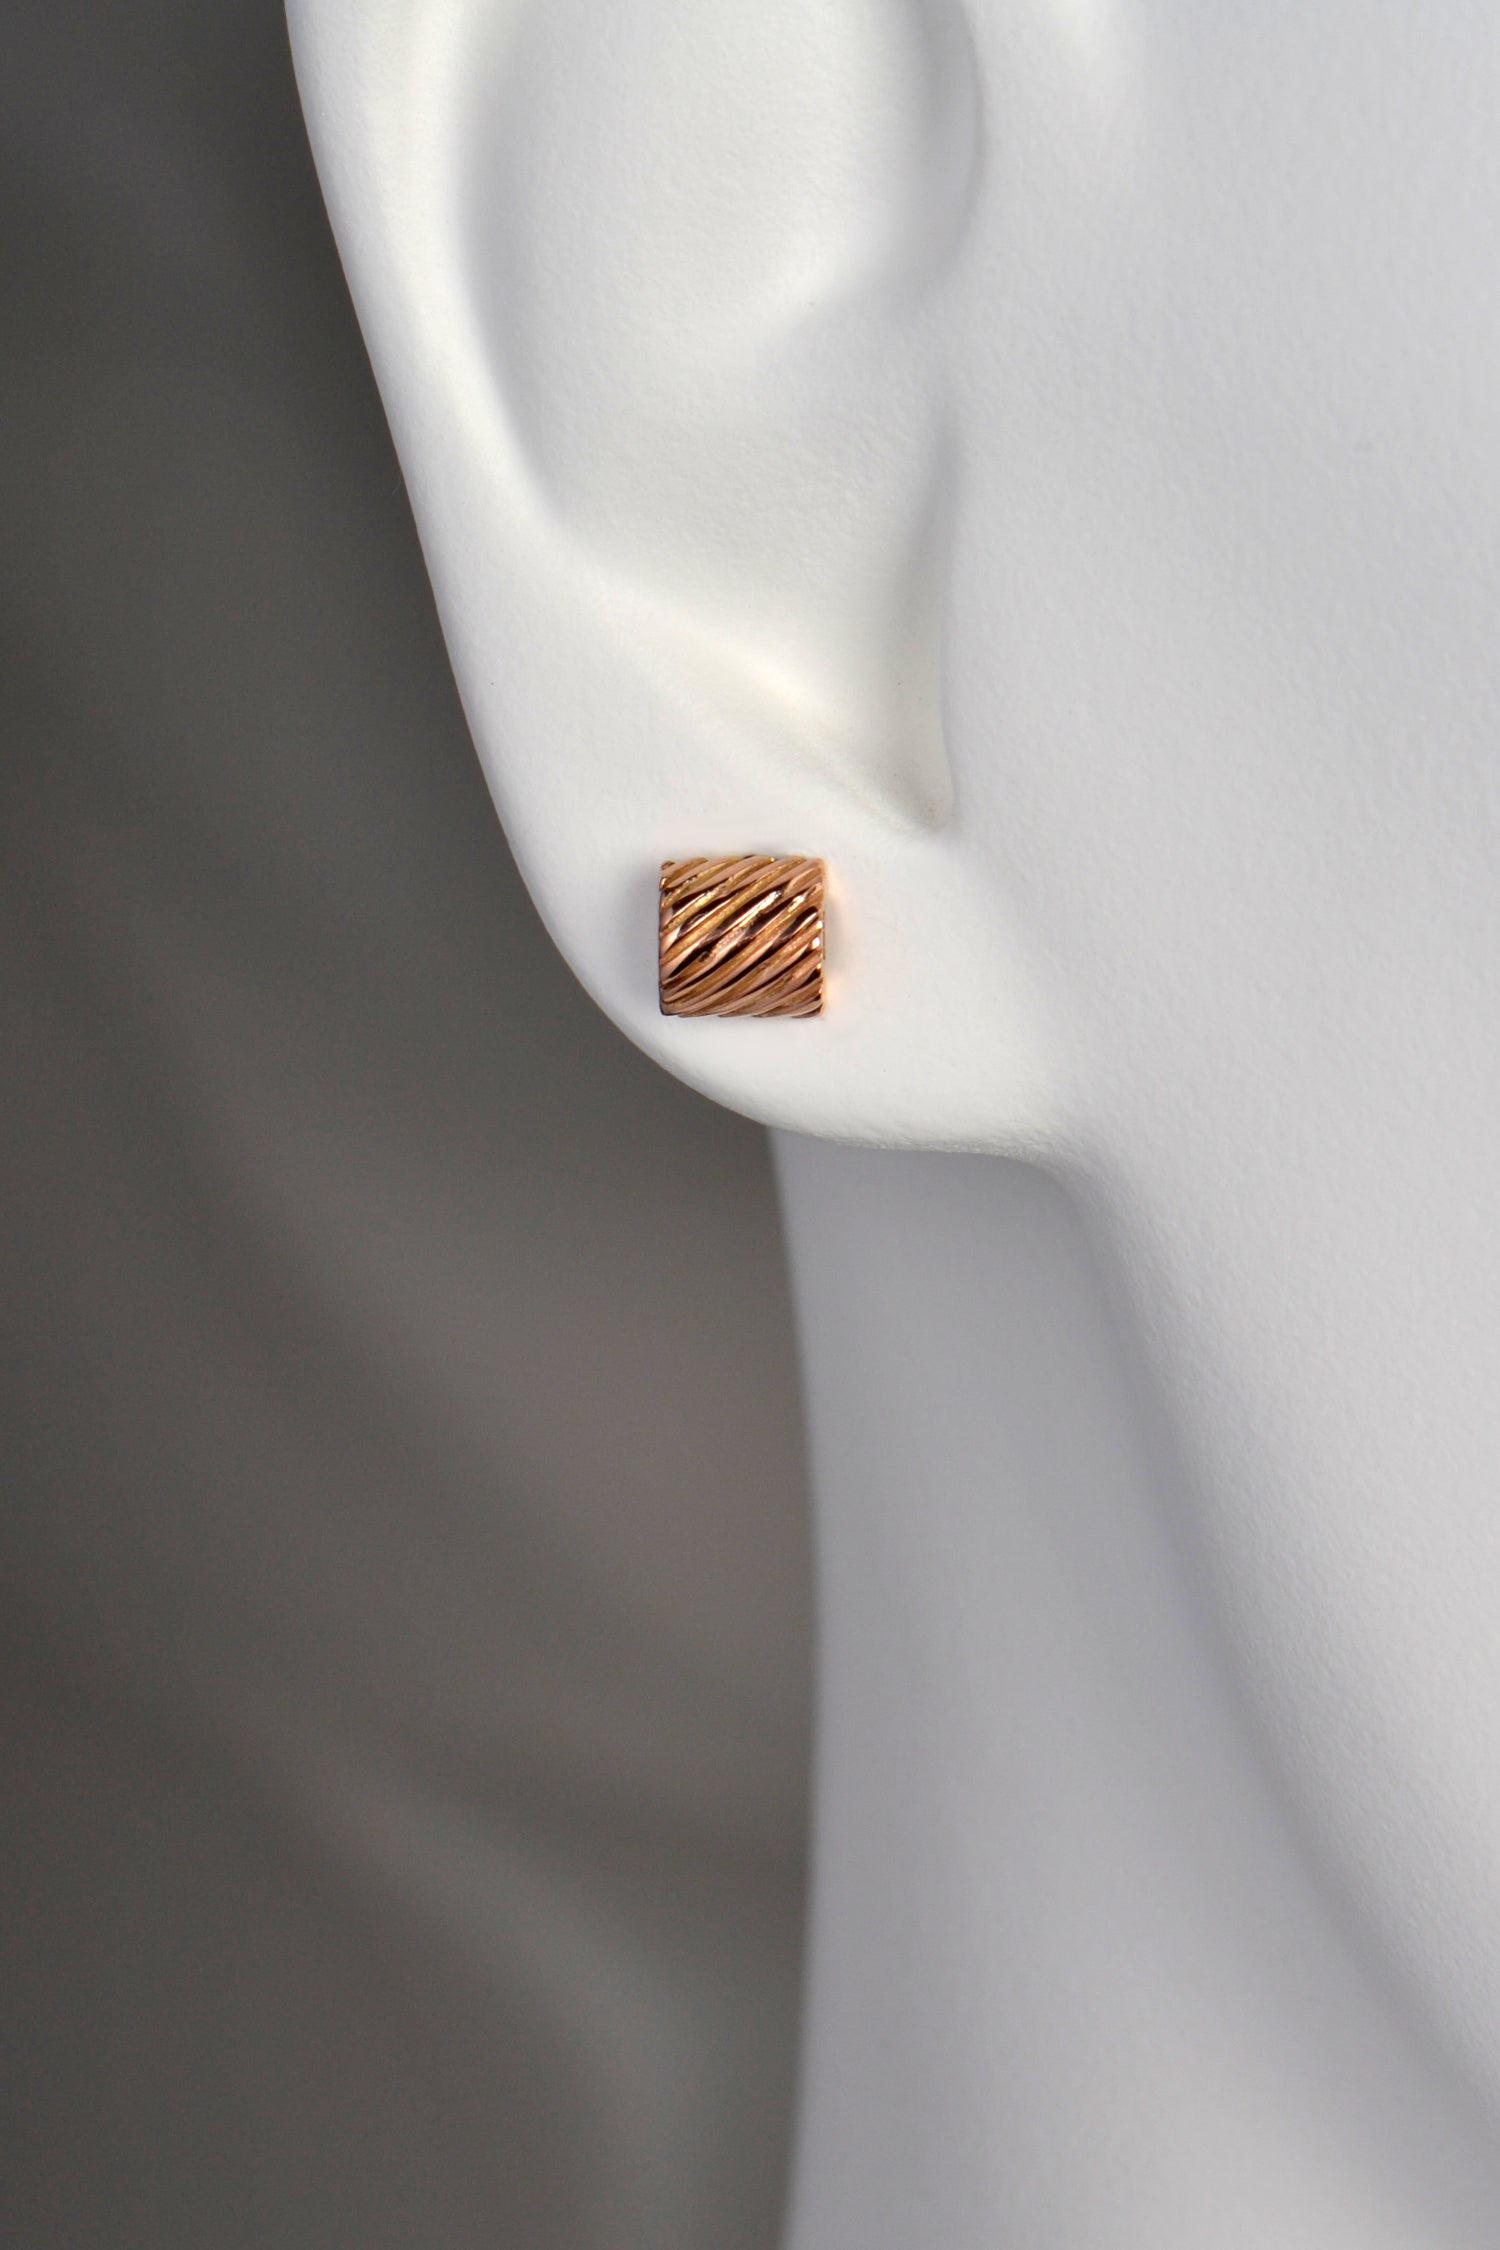 rectangular real rose gold stud earring with texture. The earring sits on the earlobe.